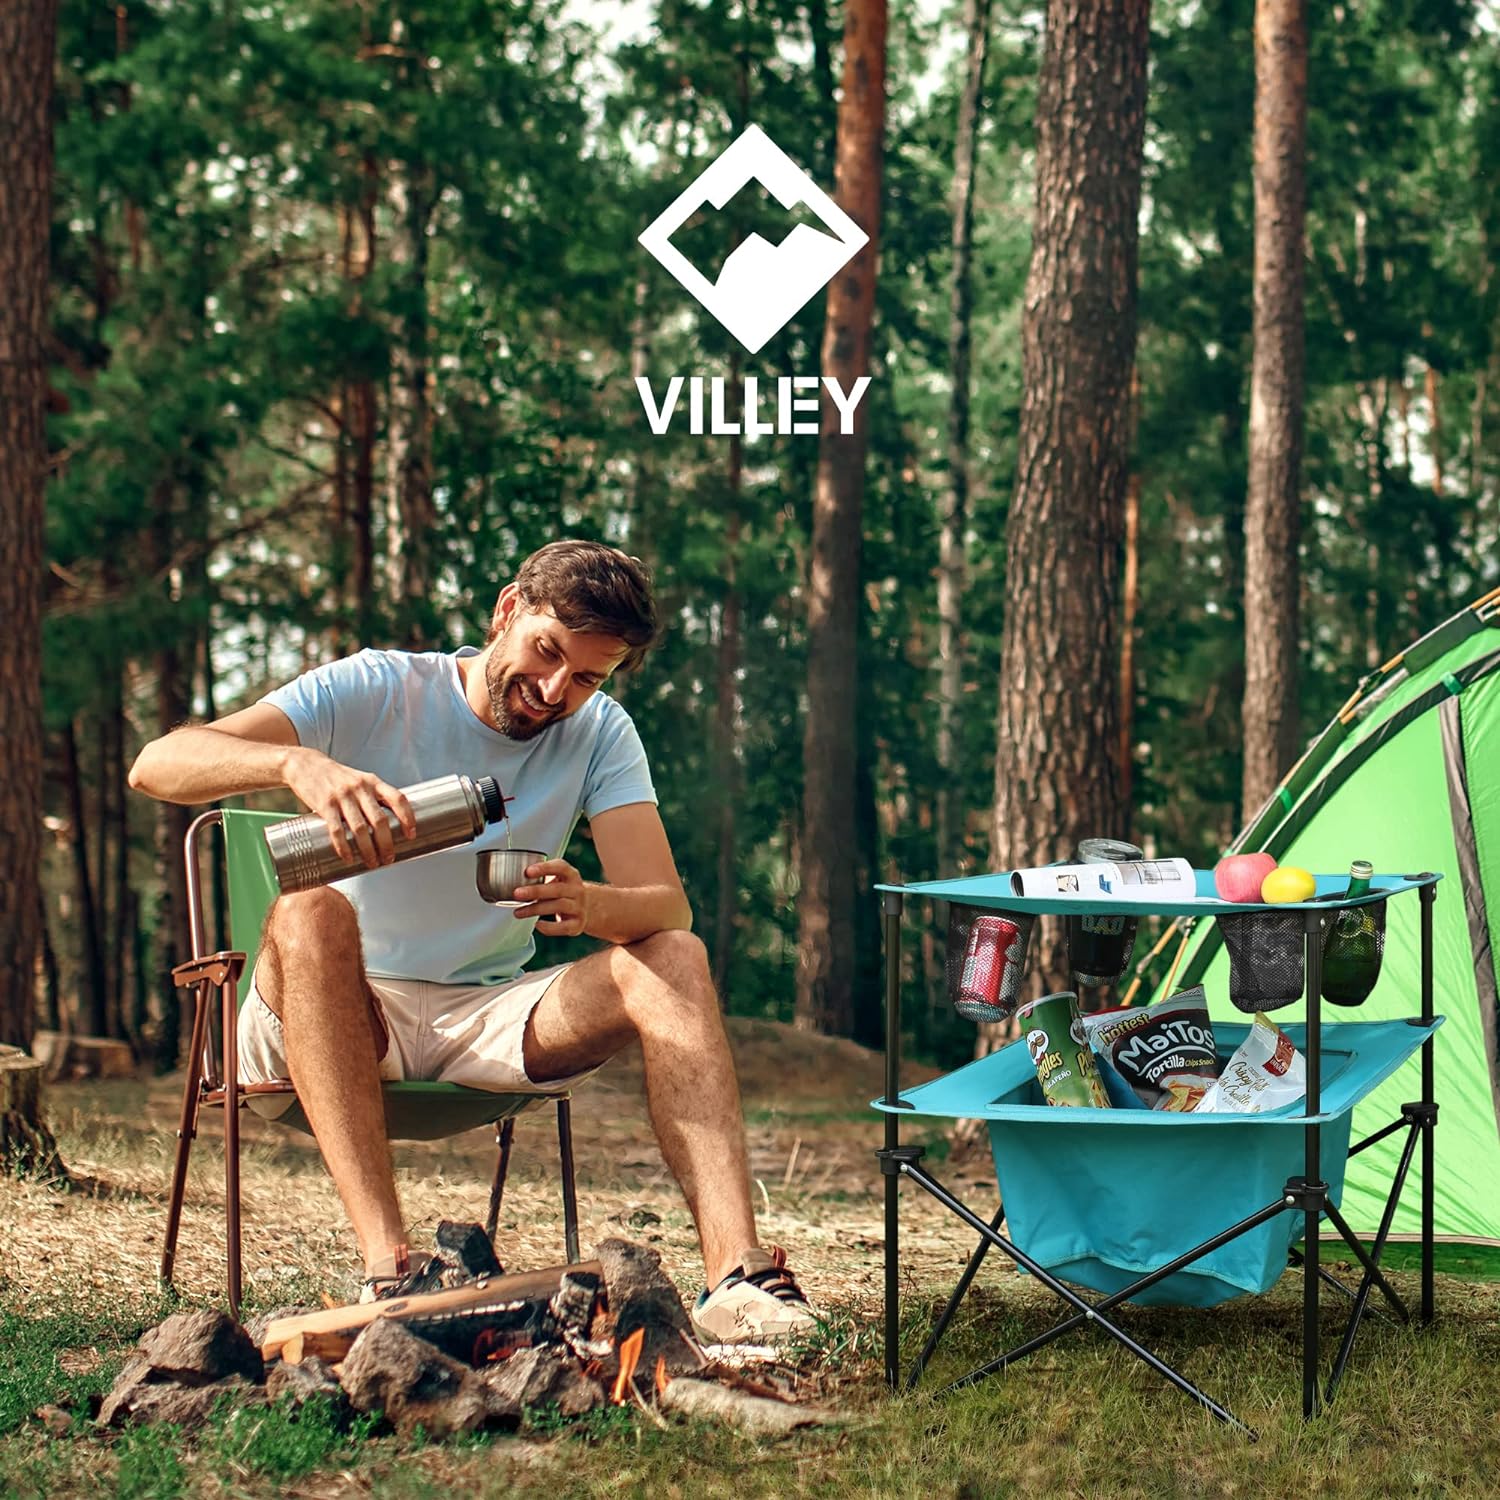 VILLEY Portable Camping Picnic Table, Lightweight Folding Beach Table with 4 Cup Holders and Carry Bag for Camp, Travel, Fishing, and Outdoor Activities